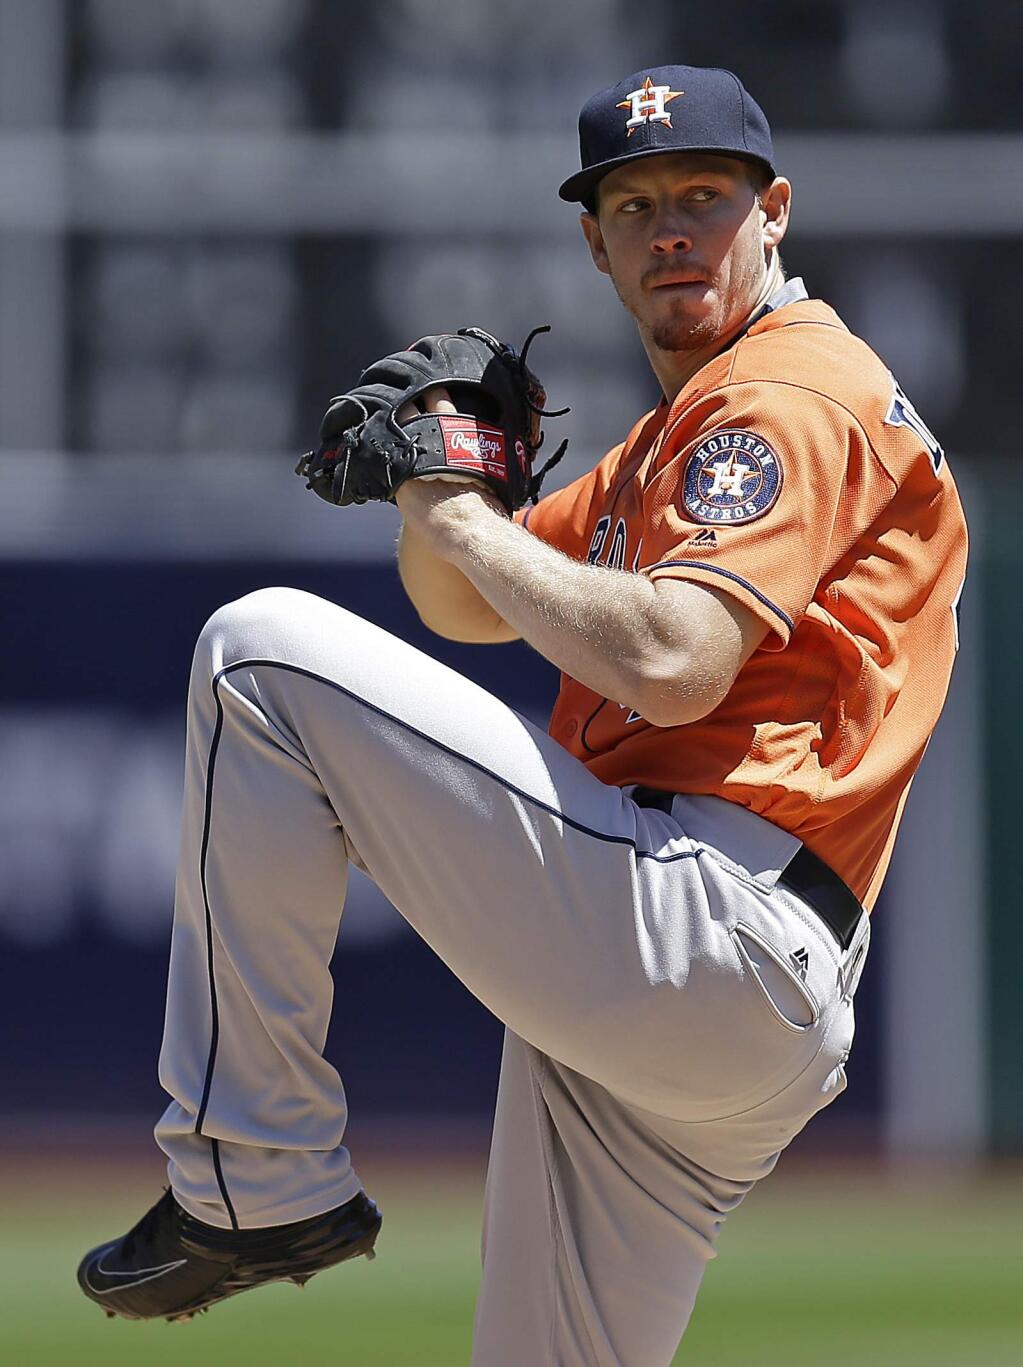 Houston Astros pitcher Chris Devenski works against the Oakland Athletics in the first inning of a baseball game Saturday, April 30, 2016, in Oakland, Calif. (AP Photo/Ben Margot)